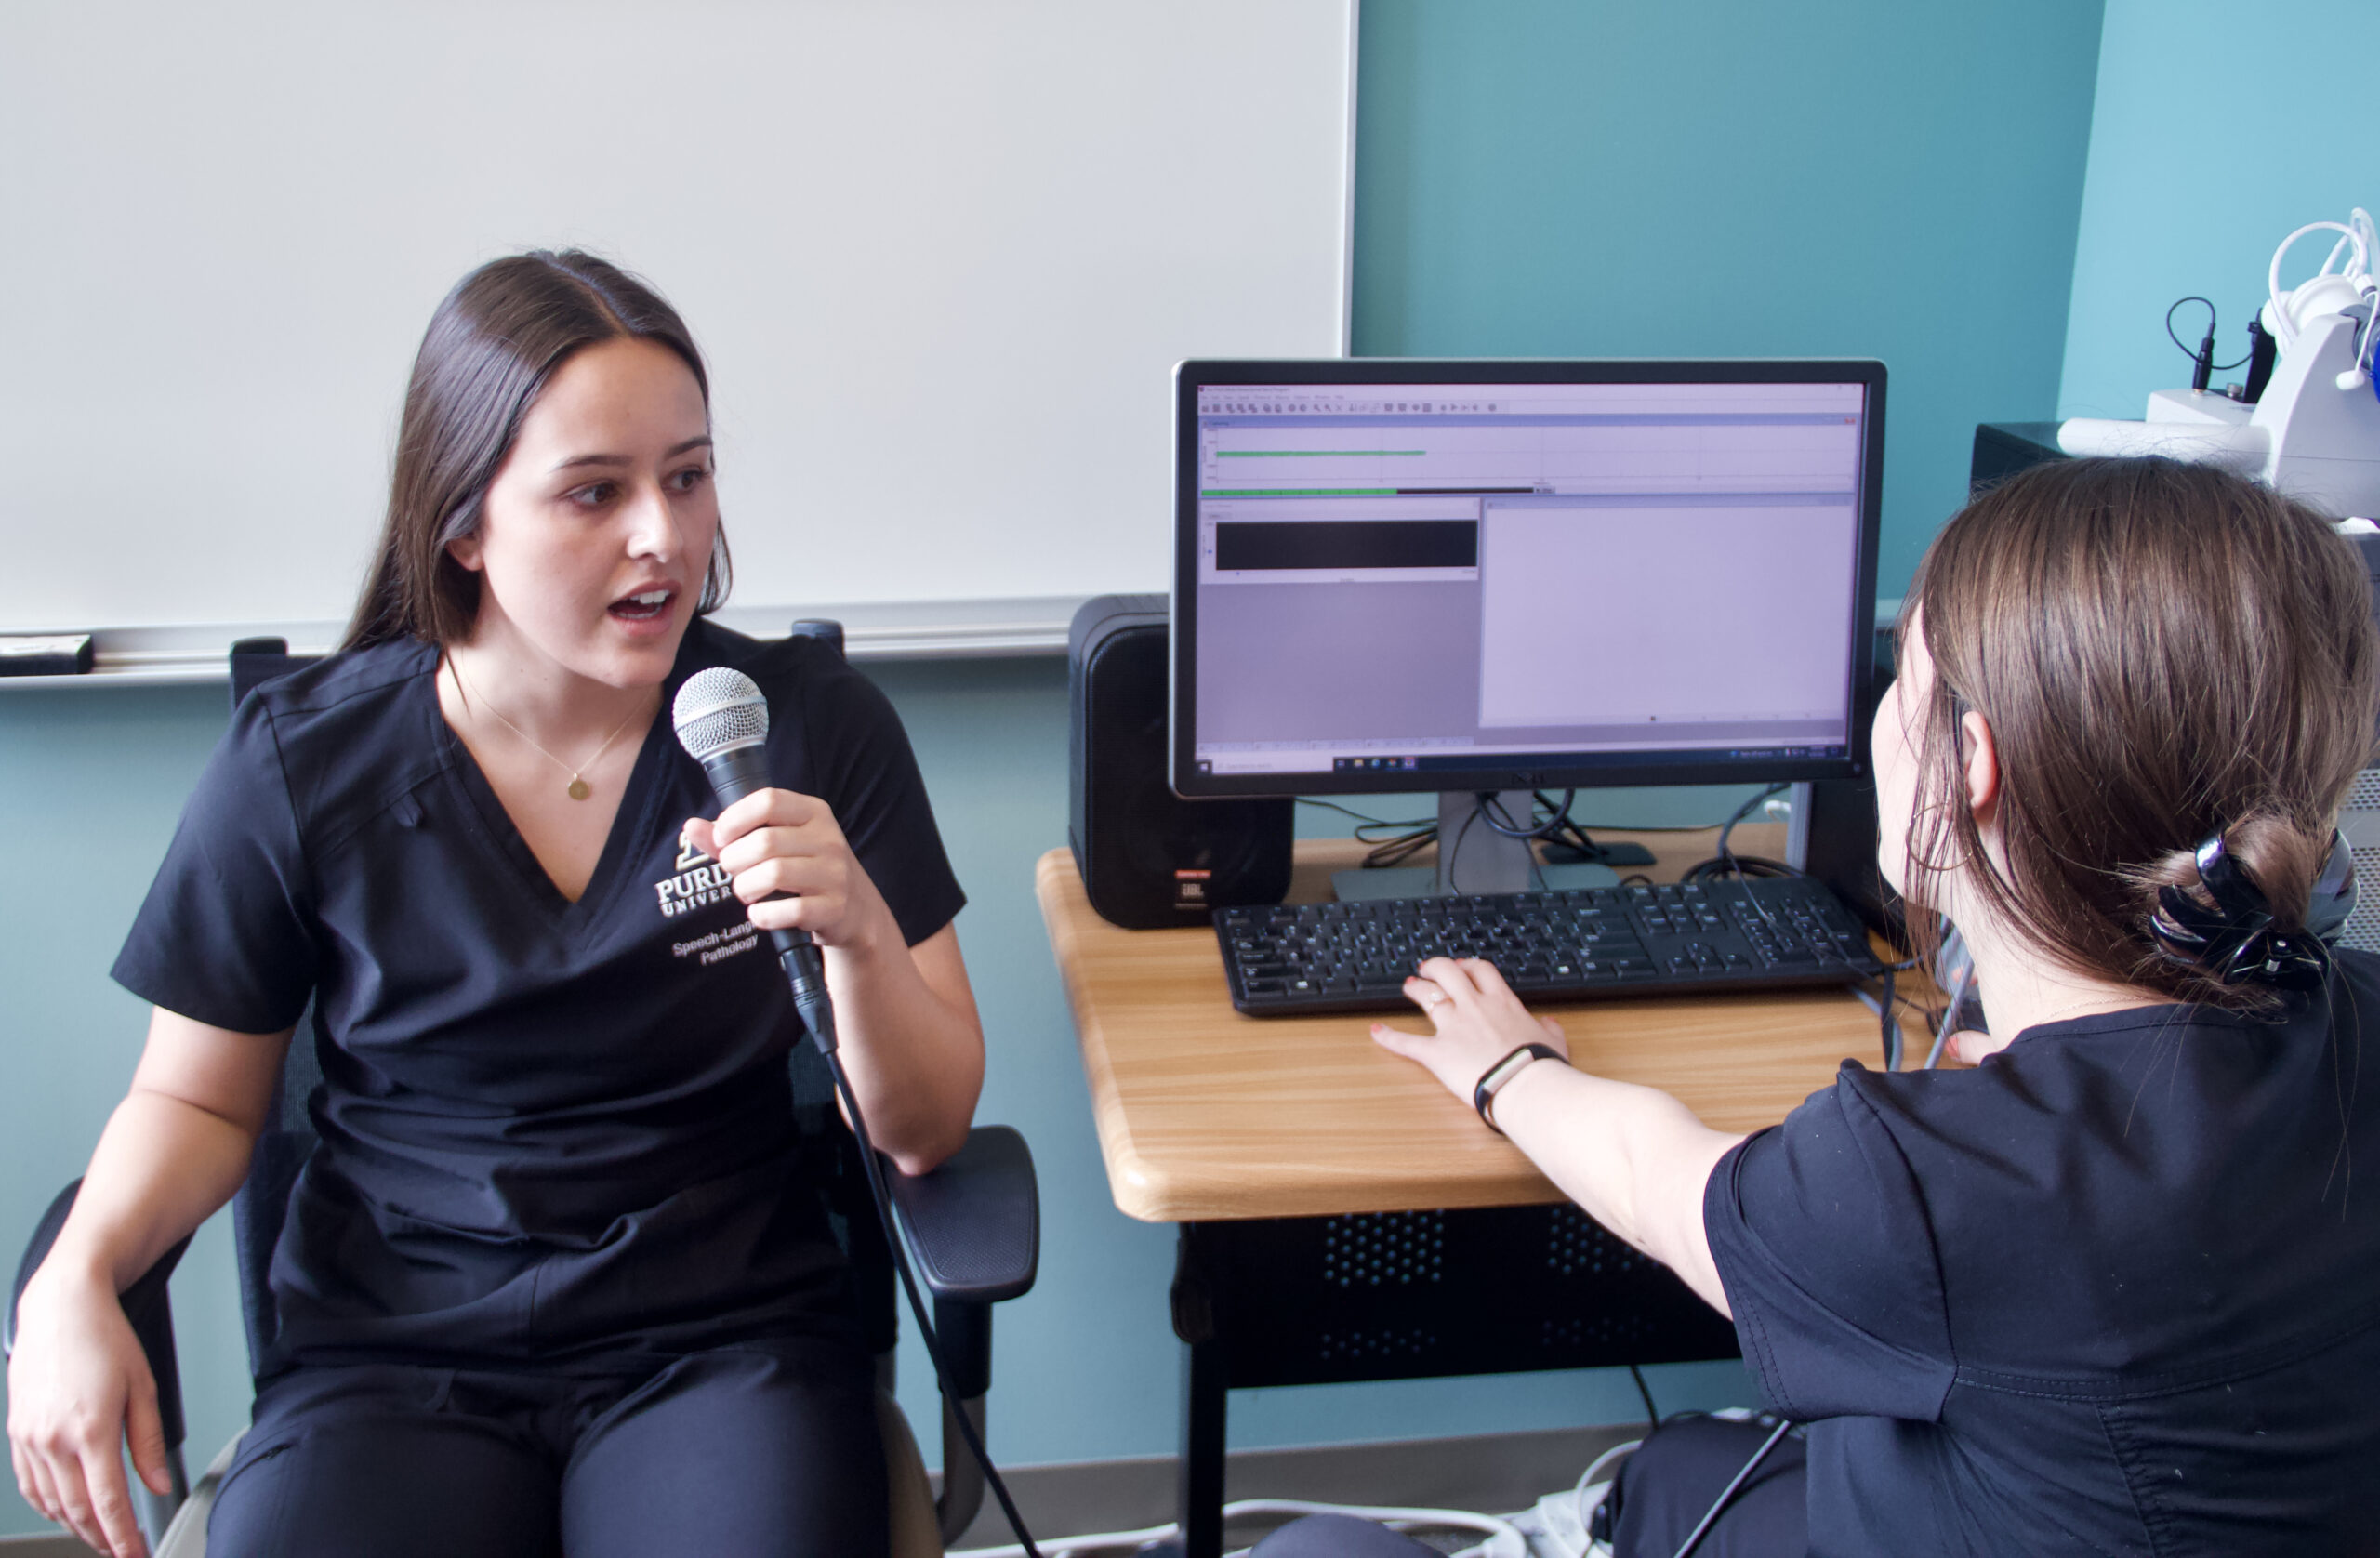 Savannah Limcaco performs a vocal exercise into a microphone connected to a computer while Mikahla Combs measures the output.